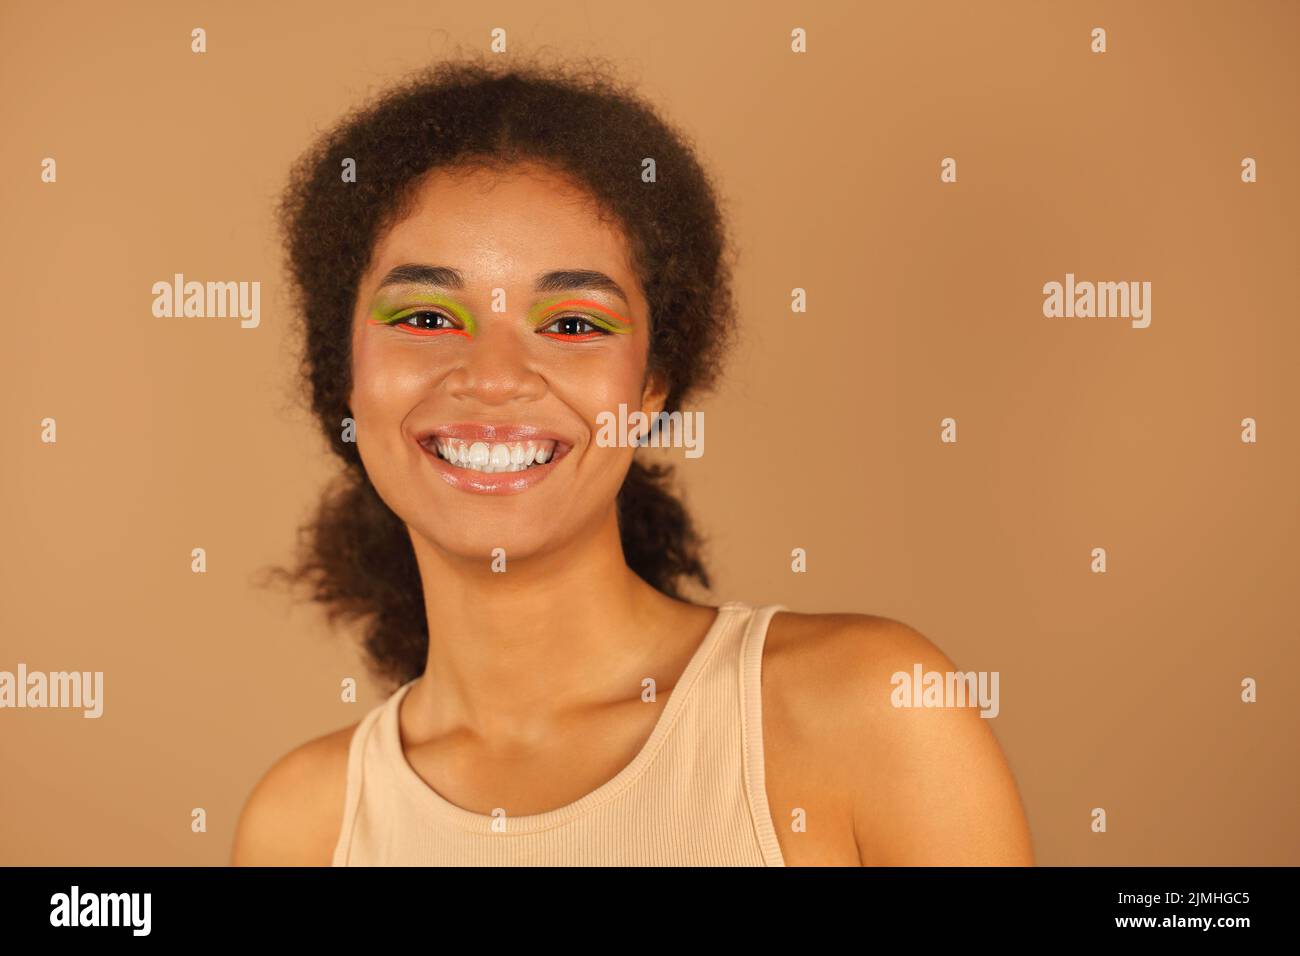 Beauty portrait of attractive young african american woman with neon color make-up smiling at camera Stock Photo